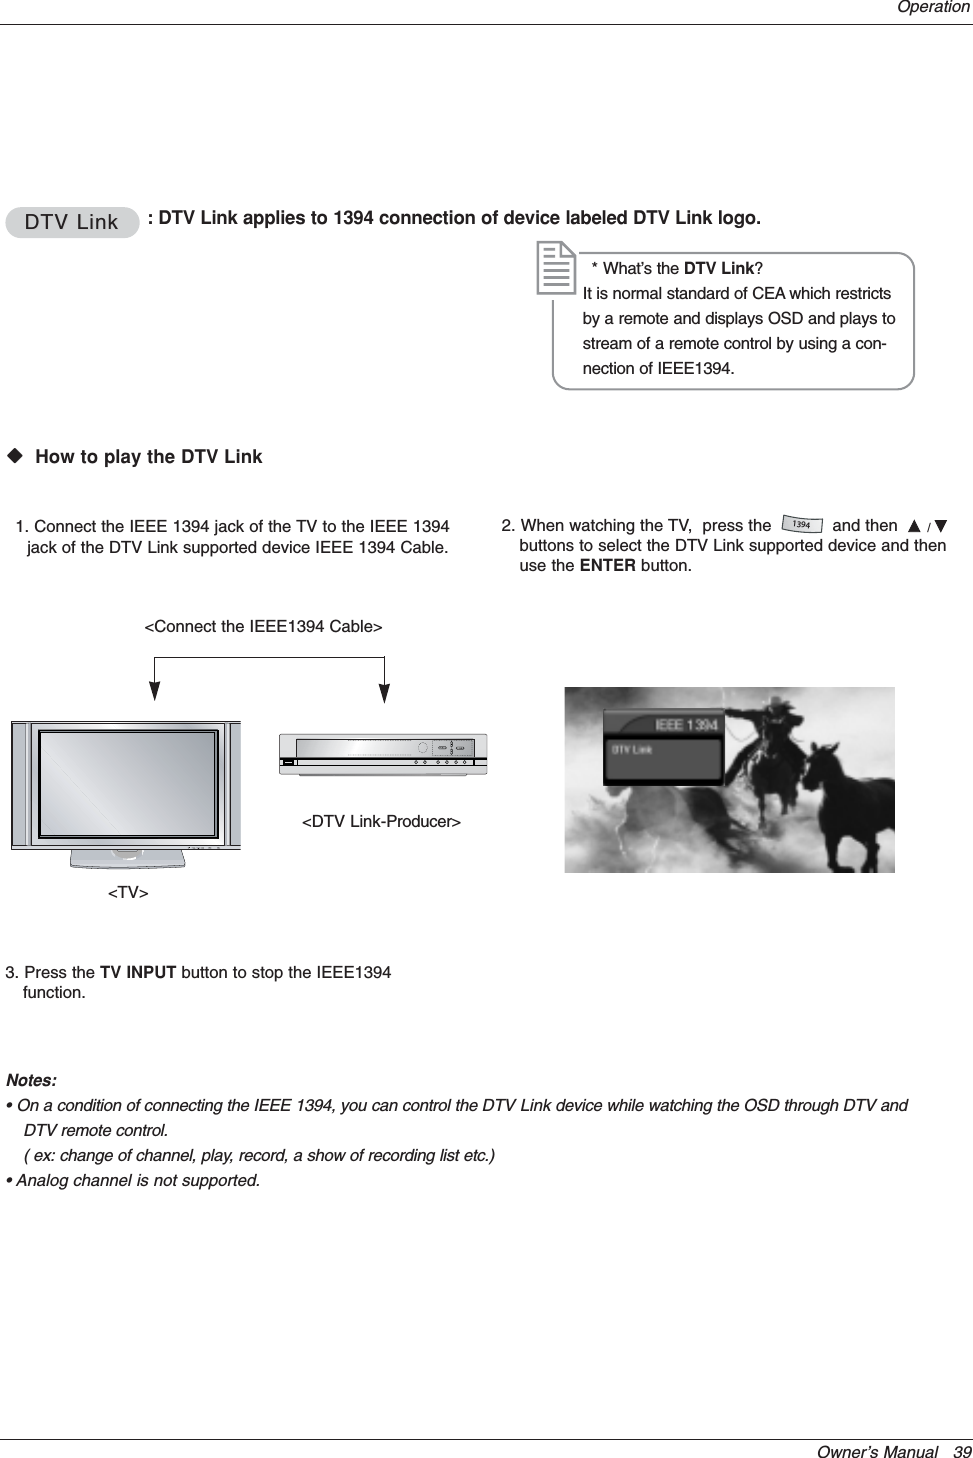 Owner’s Manual   39OperationDTV LinkDTV Link : DTV Link applies to 1394 connection of device labeled DTV Link logo.WWVHow to play the DTV Link&lt;DTV Link-Producer&gt;1. Connect the IEEE 1394 jack of the TV to the IEEE 1394jack of the DTV Link supported device IEEE 1394 Cable.* What’s the DTV Link?It is normal standard of CEA which restrictsby a remote and displays OSD and plays tostream of a remote control by using a con-nection of IEEE1394.&lt;Connect the IEEE1394 Cable&gt;2. When watching the TV,  press the            and then  D/Ebuttons to select the DTV Link supported device and thenuse the ENTER button.1394&lt;TV&gt;3. Press the TV INPUT button to stop the IEEE1394function.Notes:• On a condition of connecting the IEEE 1394, you can control the DTV Link device while watching the OSD through DTV andDTV remote control.( ex: change of channel, play, record, a show of recording list etc.)• Analog channel is not supported.